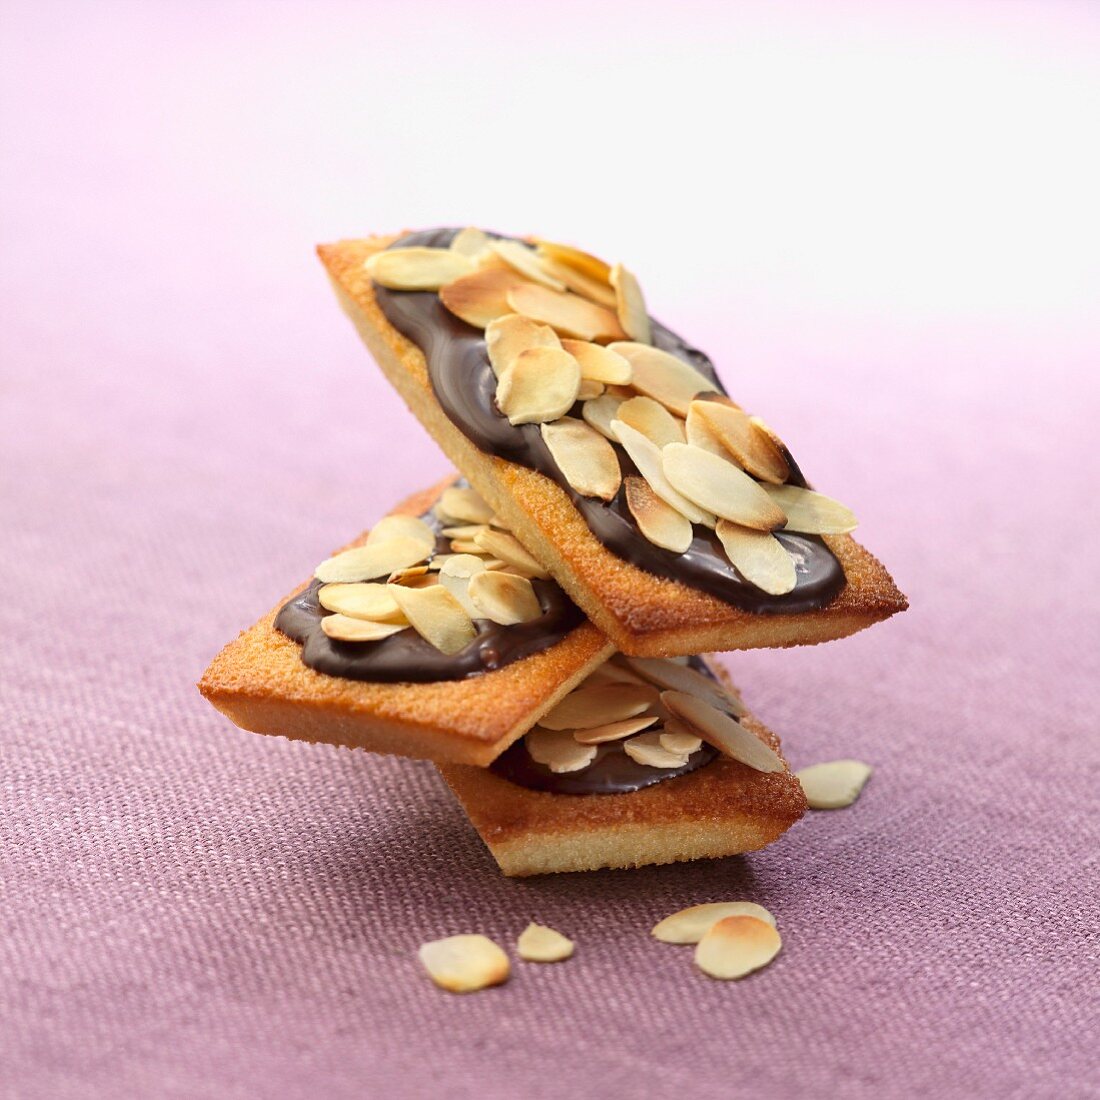 Financiers topped with chocolate and thinly sliced almonds